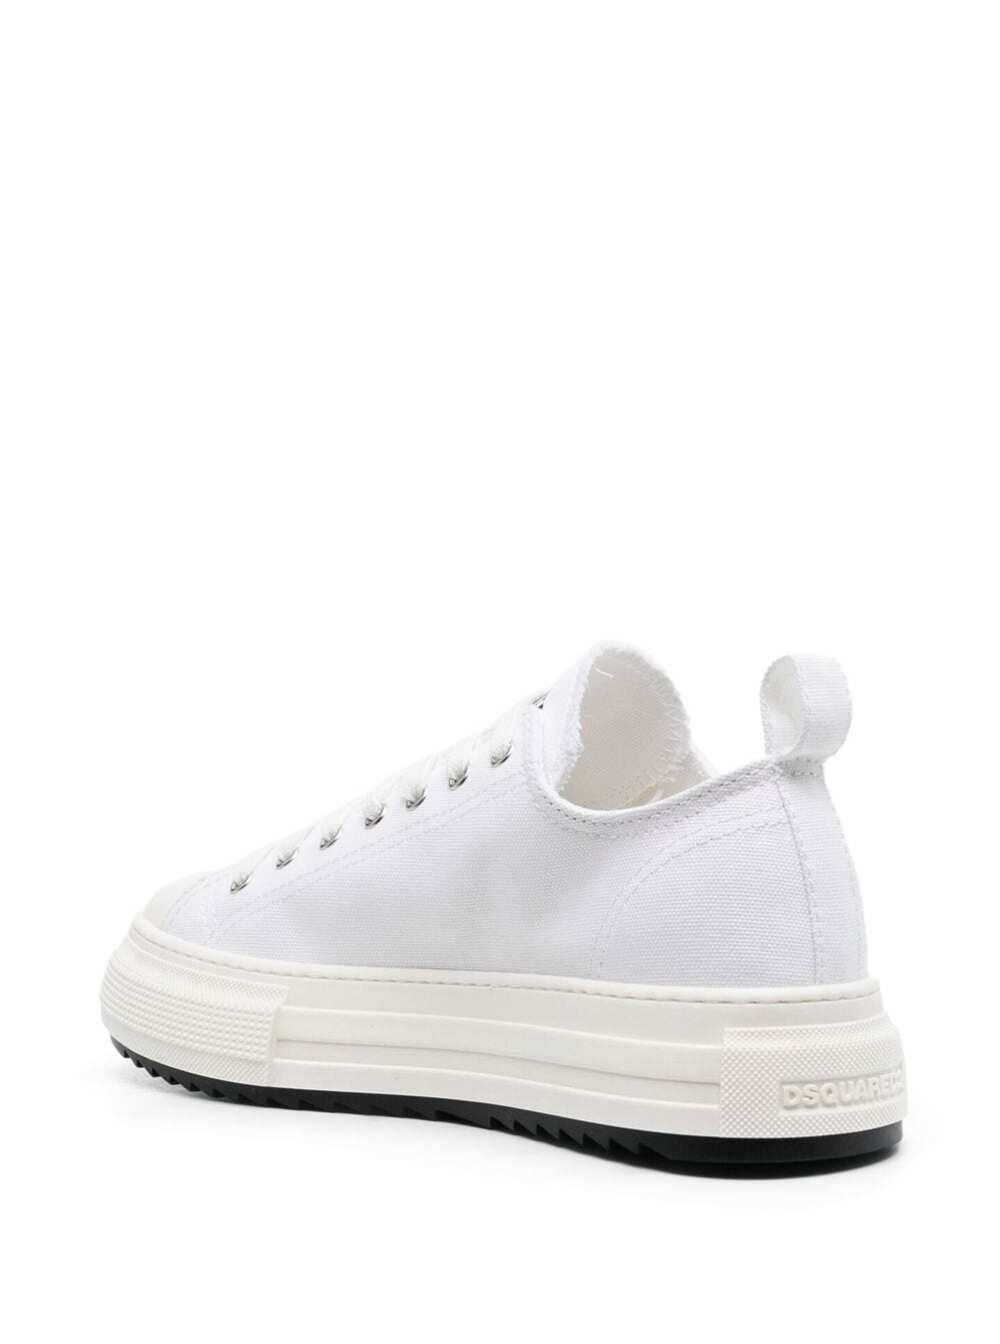 DSquared² Low-top Flatform Sneakers in White for Men |